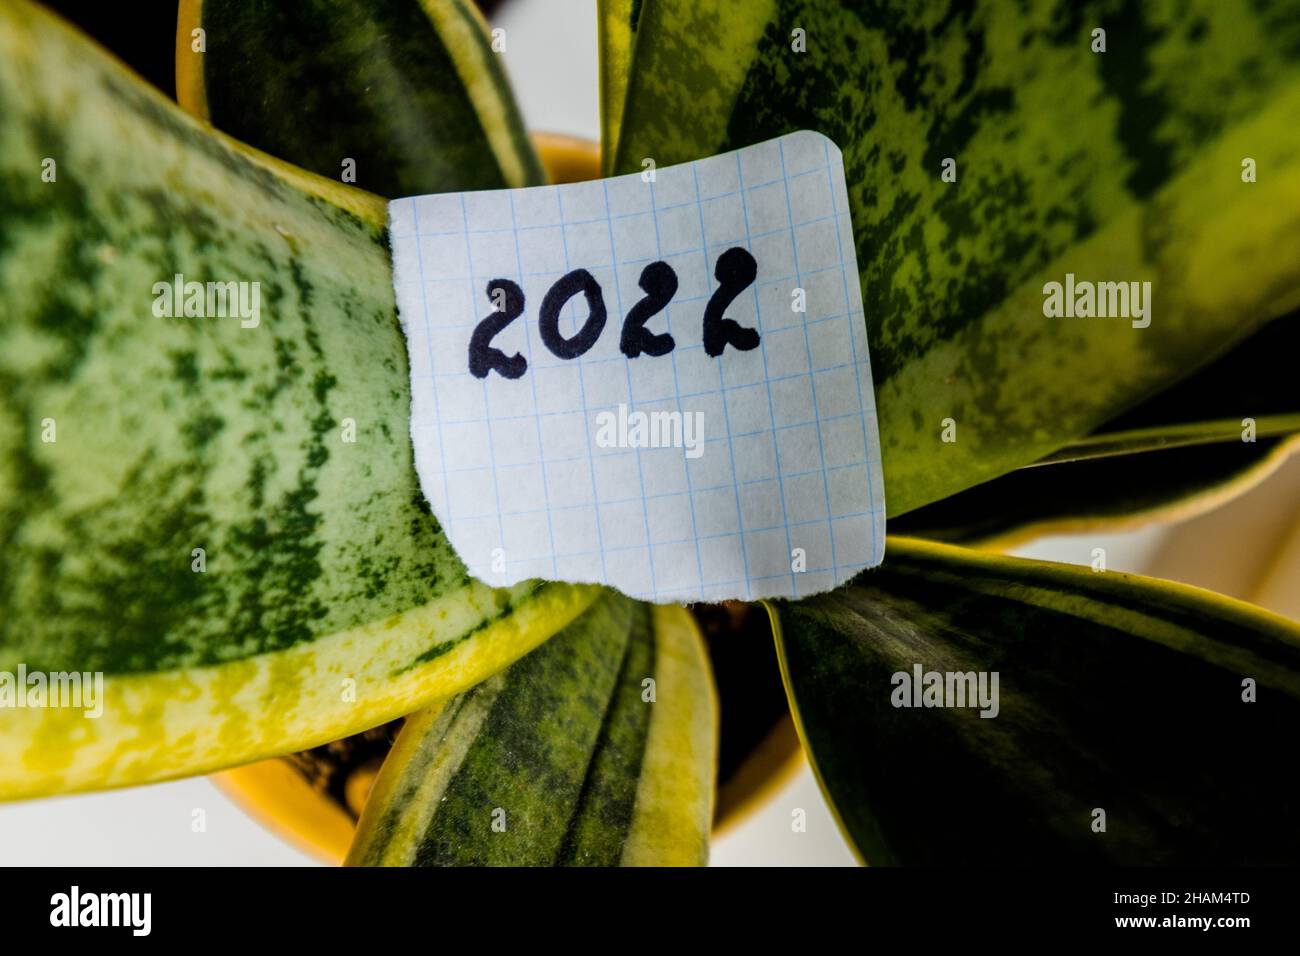 New year 2022. The number 2022 is written on a piece of paper and lies on the green leaves of a house plant. Stock Photo